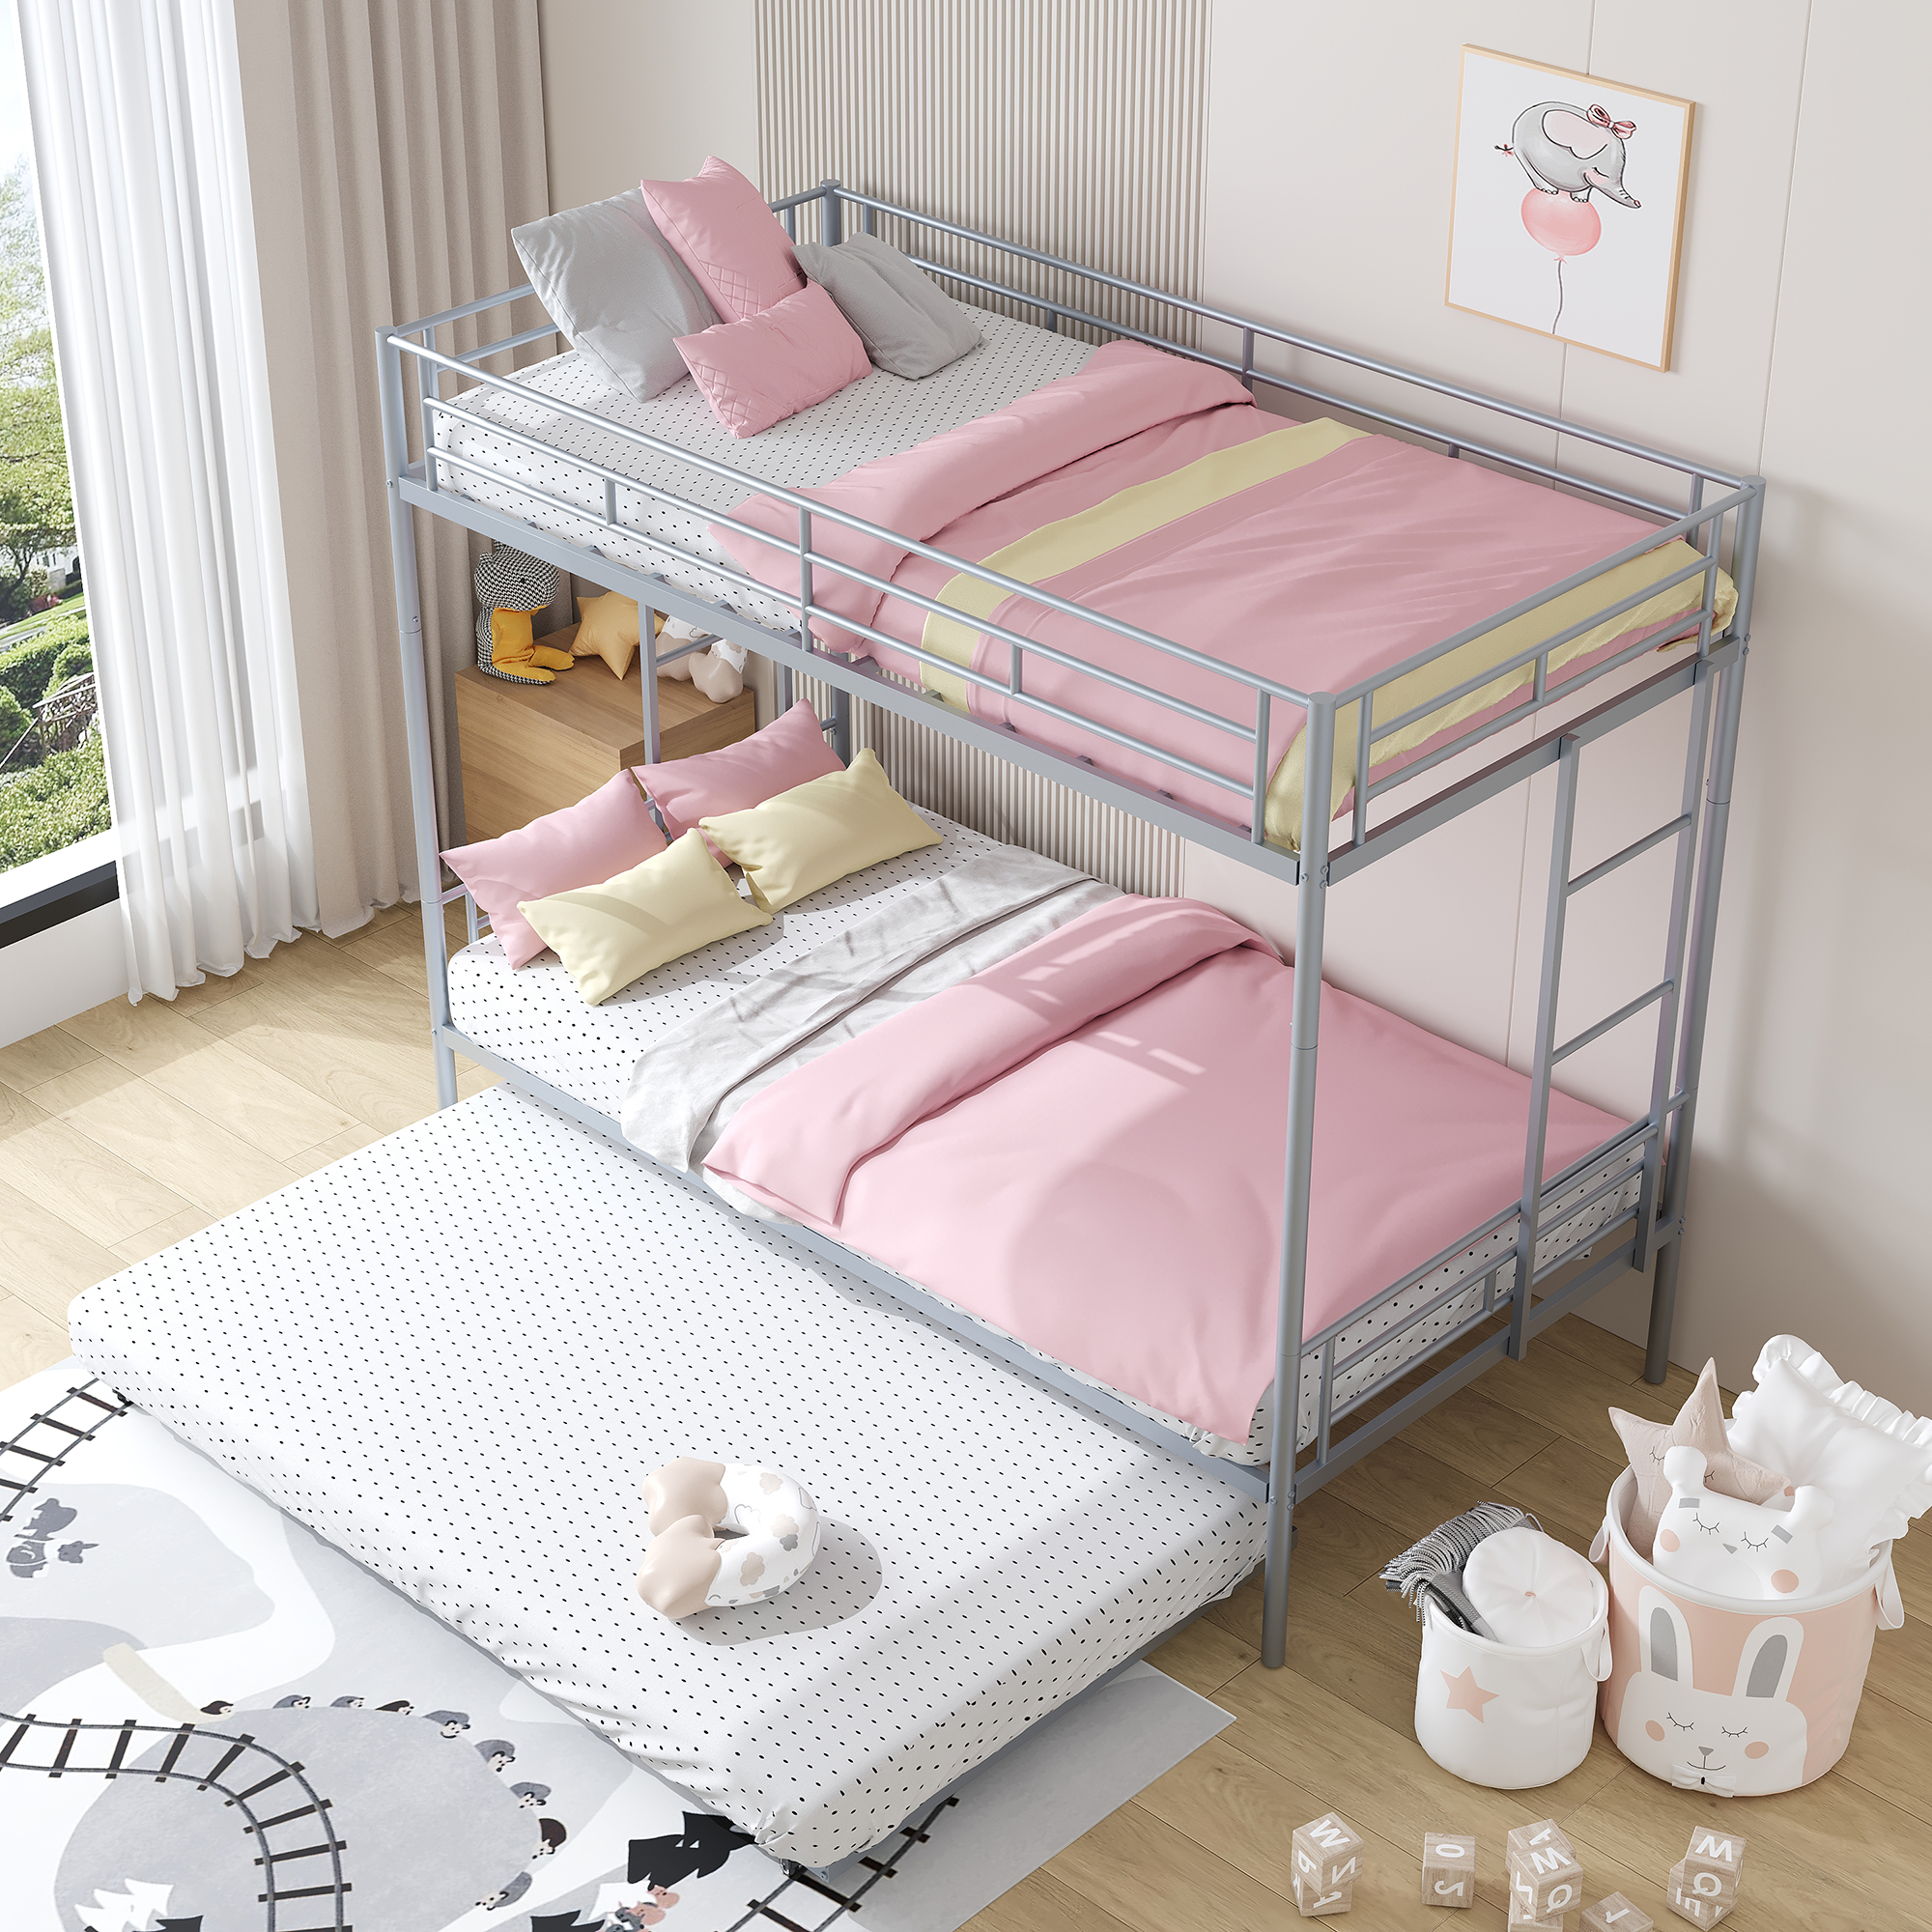 uhomepro Metal Twin Over Twin Bunk Beds with Trundle Bed, Twin Bunk Beds for Kids Adults Teens, Bunk Bed Can Be Divided Into 2 Twin Beds with Trundle, 2 Ladders, No Box Spring Need, Silver - image 2 of 13